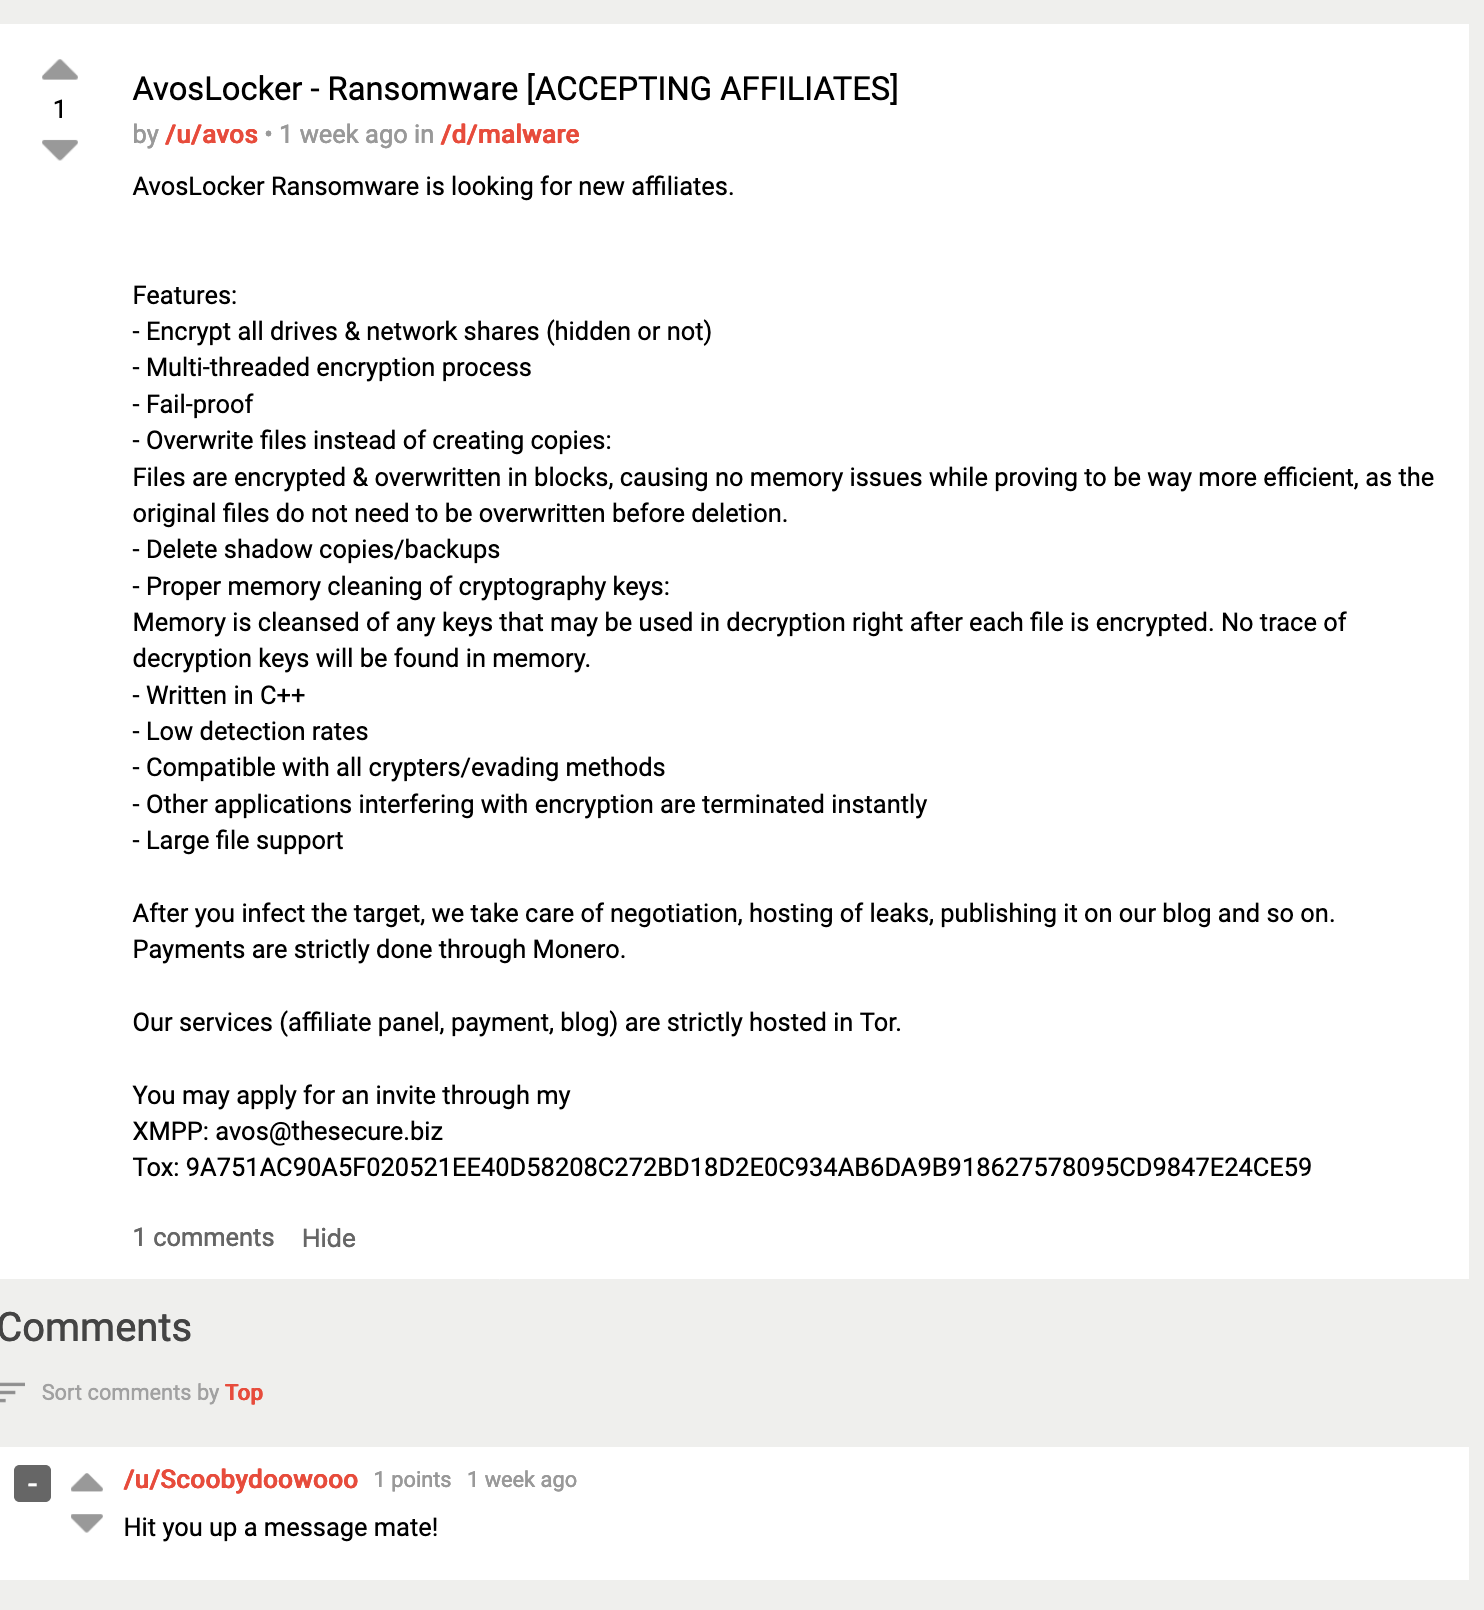 The screenshot shows a message posted in Dread, a dark web discussion forum. It announces an affiliate program for AvosLocker, one of the four emerging ransomware groups we identified. The message is titled, "AvosLocker - Ransomware [ACCEPTING AFFILIATES]" 